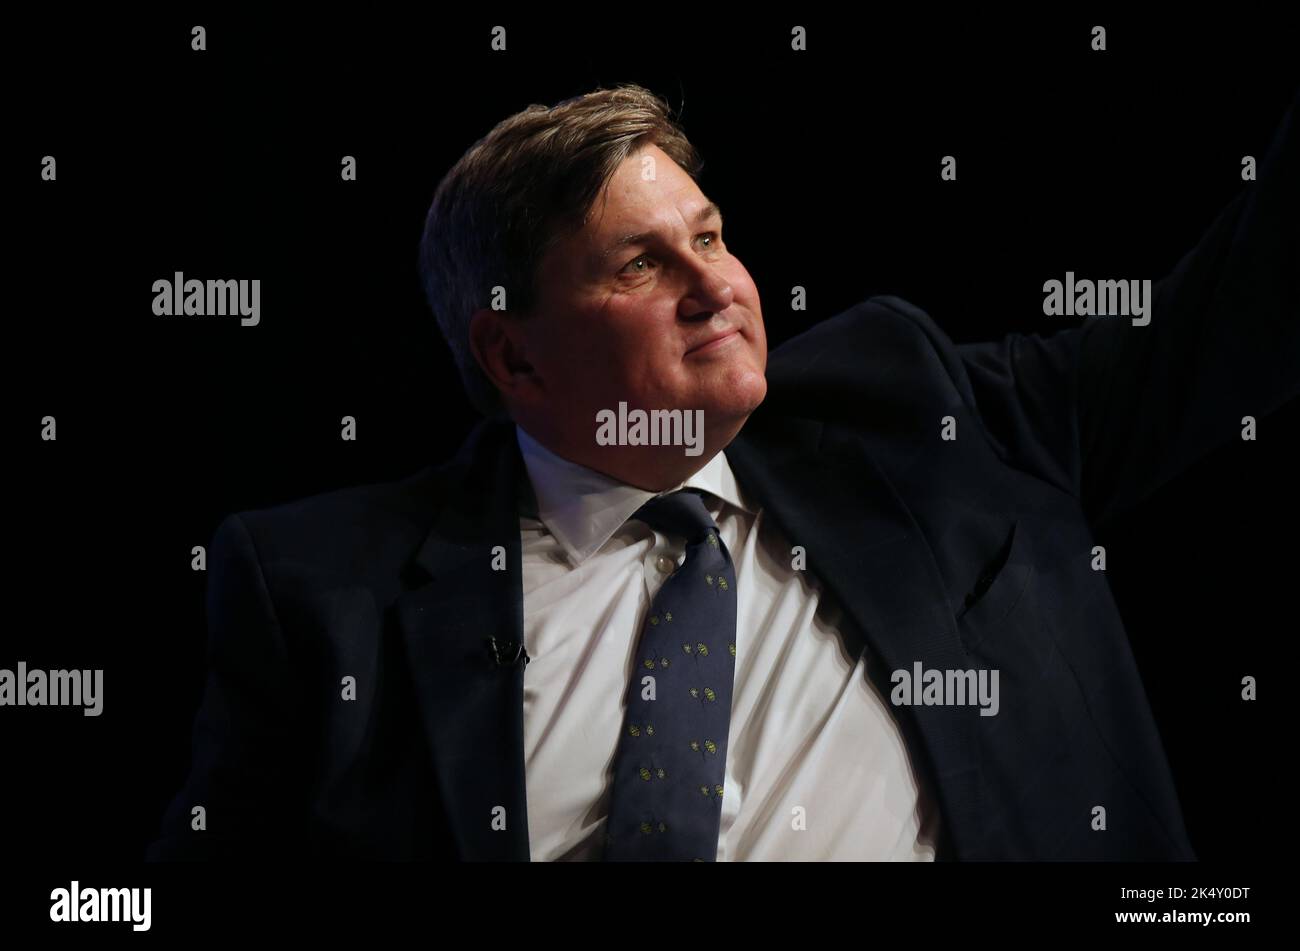 Birmingham, UK. 4 October, 2022. Education Secretary Kit Malthouse speaks during the Conservative Party's annual conference at the International Convention Centre in Birmingham. Picture date: Monday October 4, 2022. Credit: Isabel Infantes/Empics/Alamy Live News Stock Photo